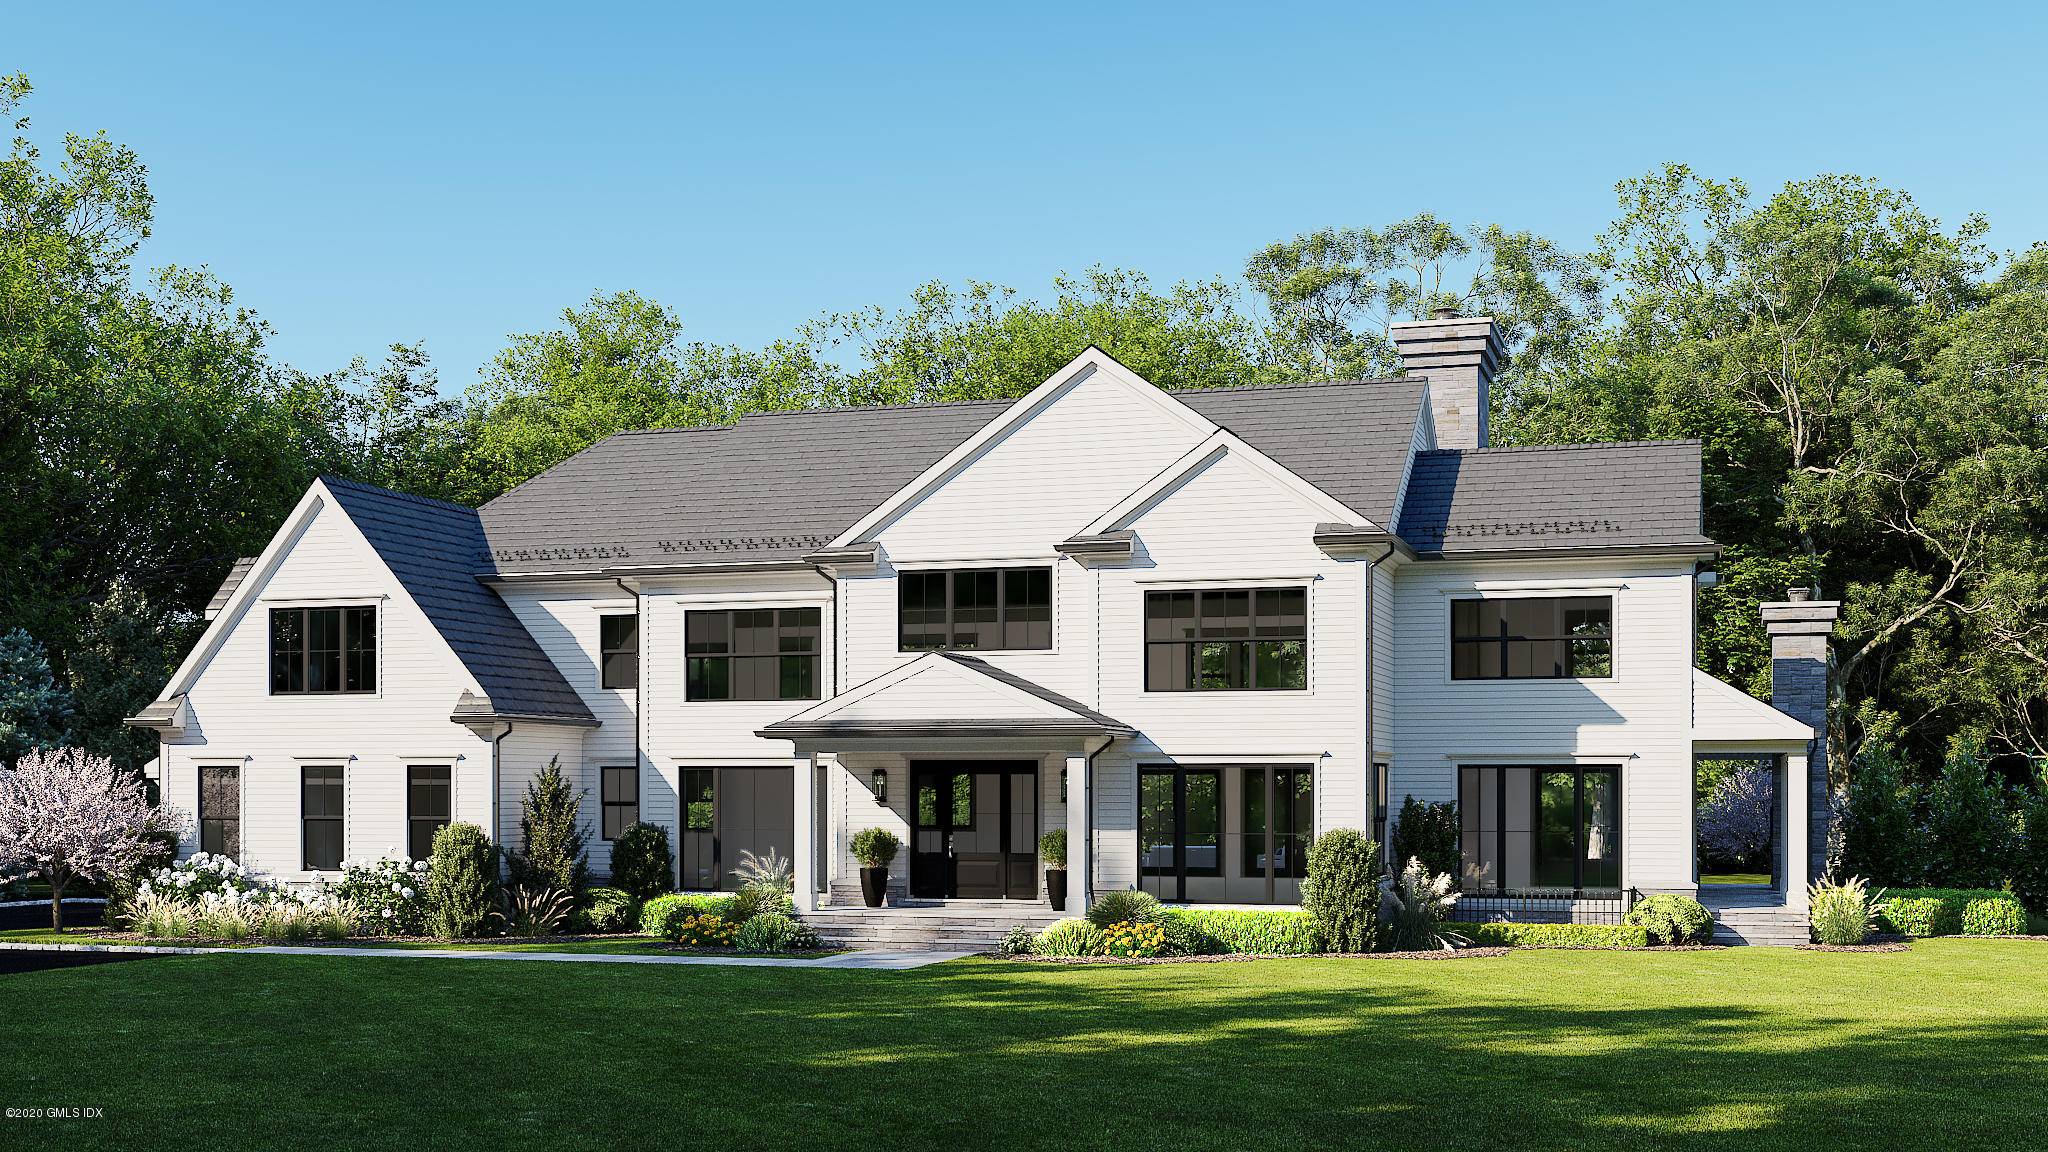 The Newest Luxury Construction in Greenwich is underway !